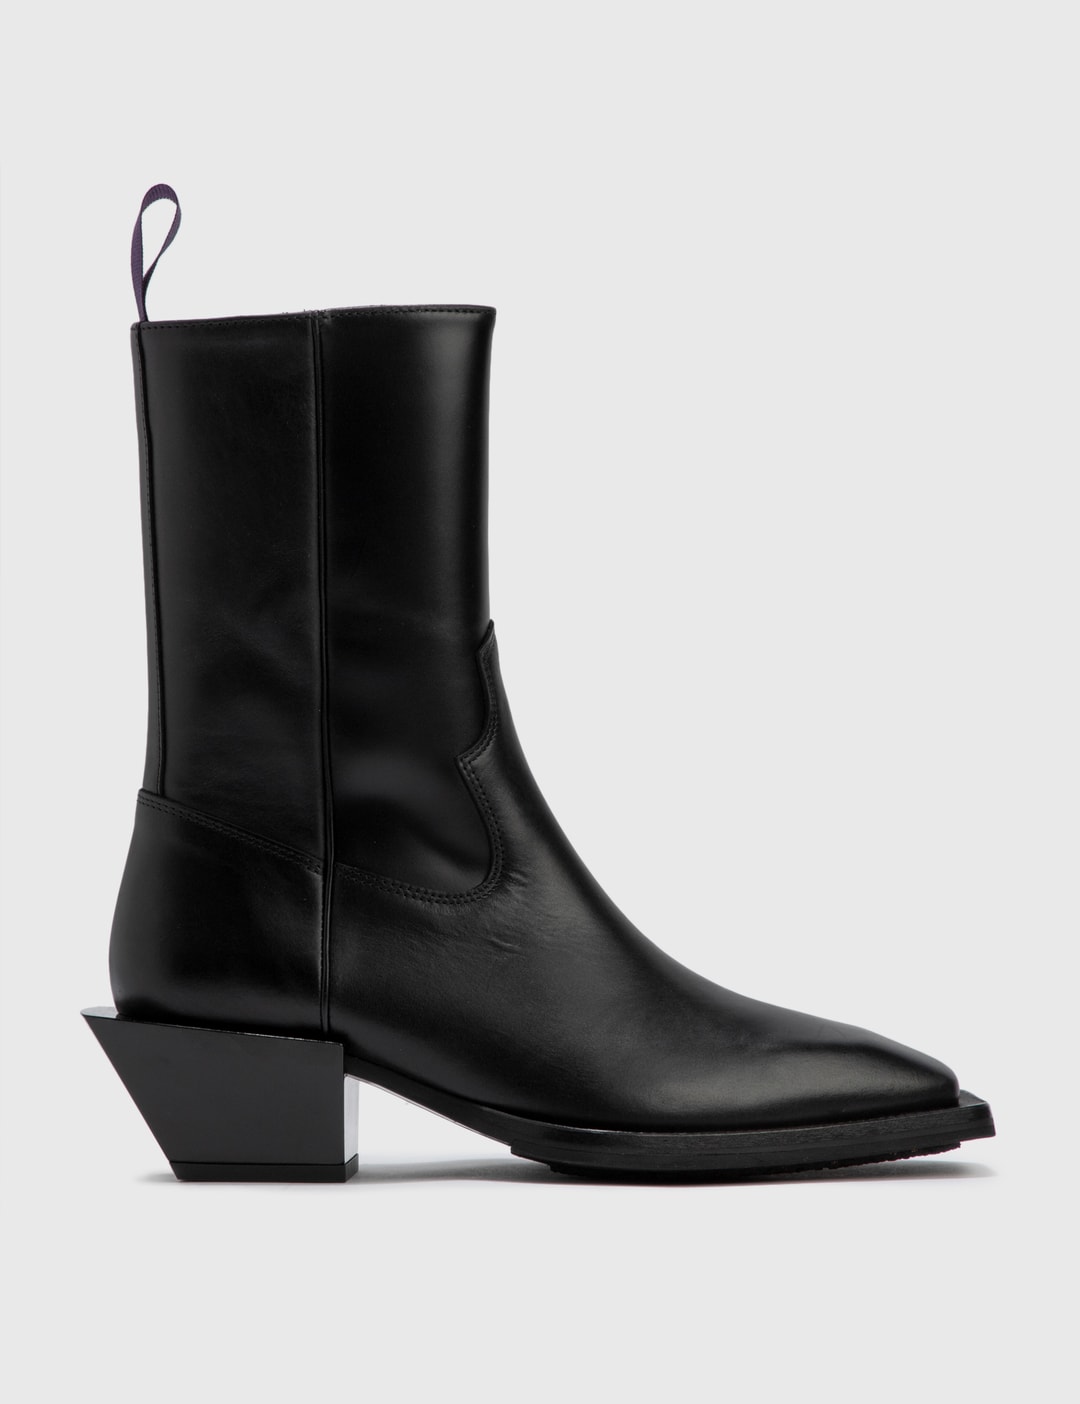 Eytys - Luciano Boots | HBX - Globally Curated Fashion and Lifestyle by ...